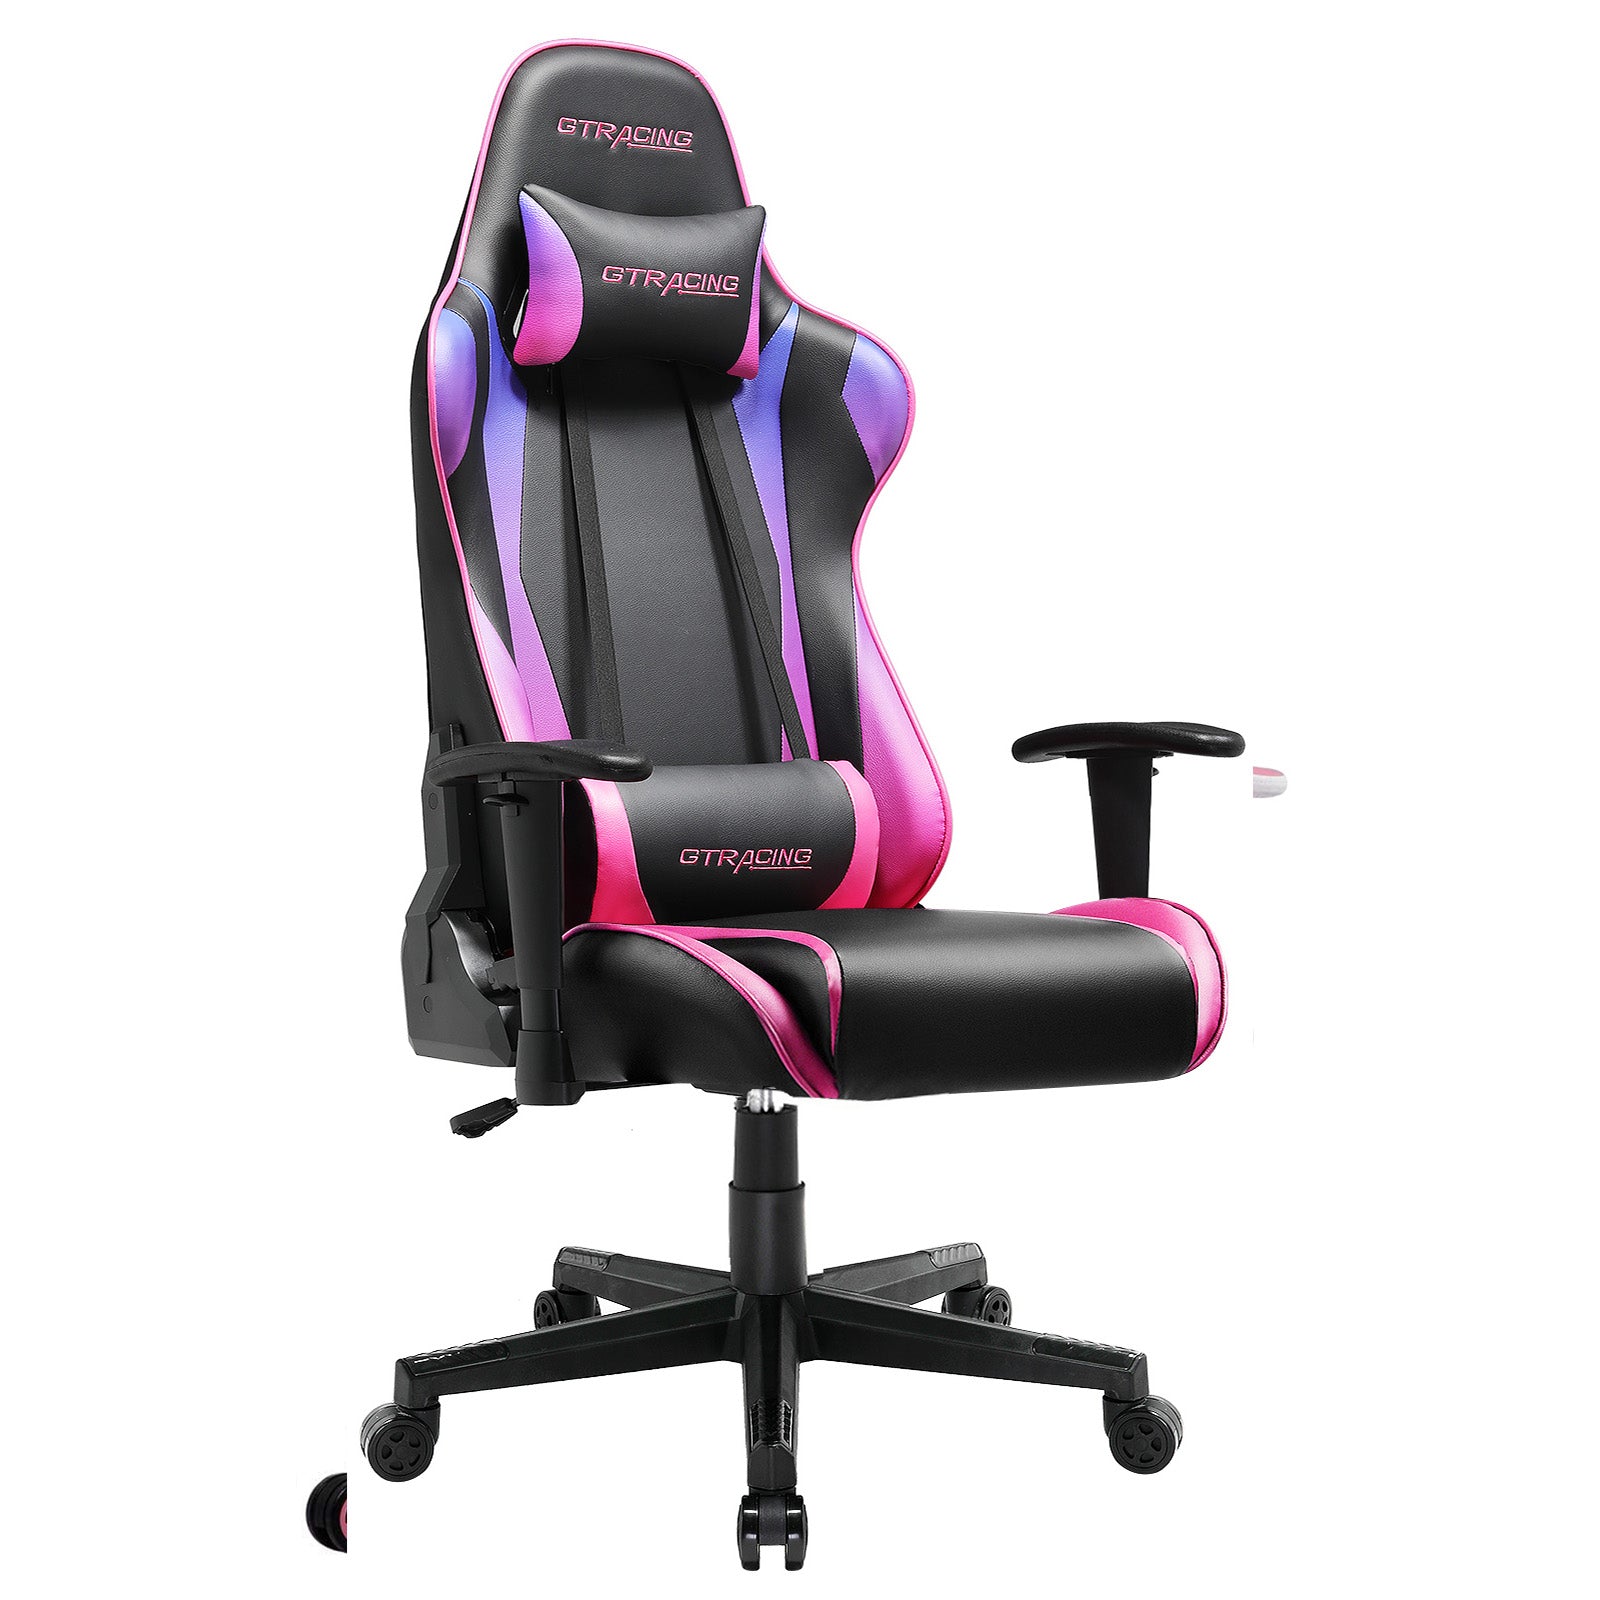 GT002-BLUE Reclining Gaming Chair | GTRACING – GTRACING（ジー ...